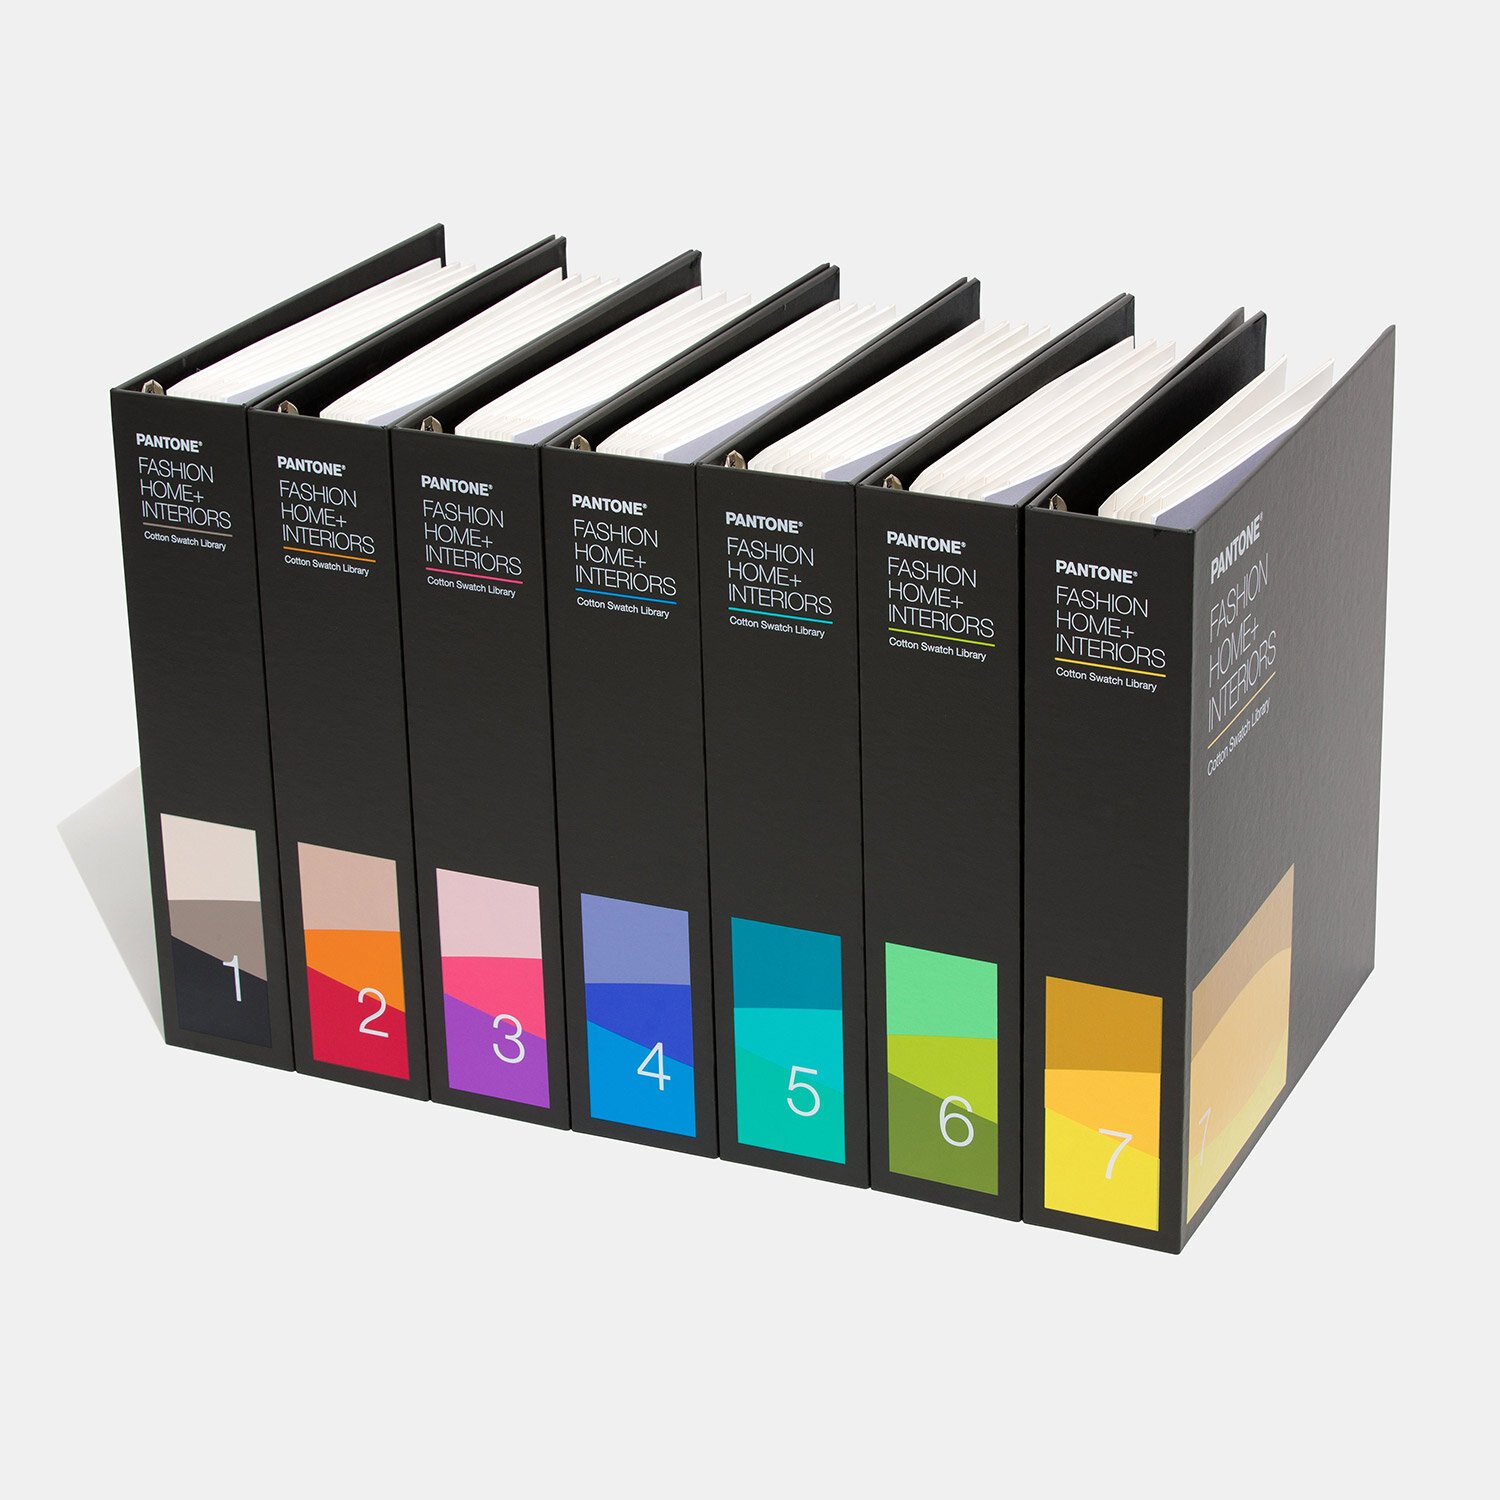  The organization of the colorways was redesigned so that each book contains a specific family of hues which can be identified simply by looking at the cover or spine of the book. 